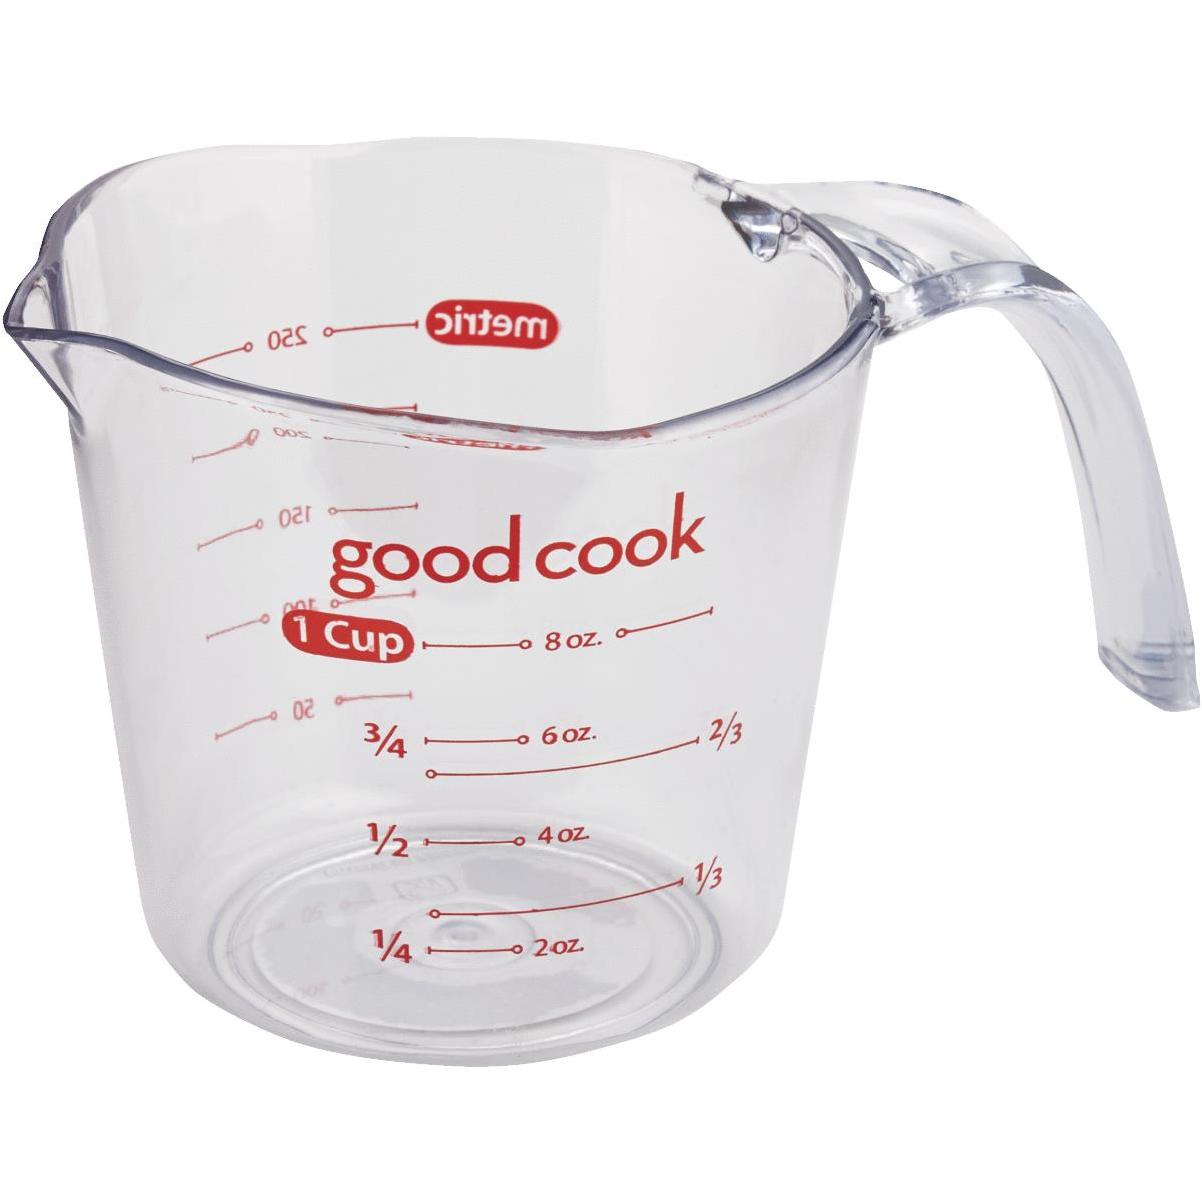 Pyrex Prepware 6001075 Measuring Cup, Red Graphics, Clear